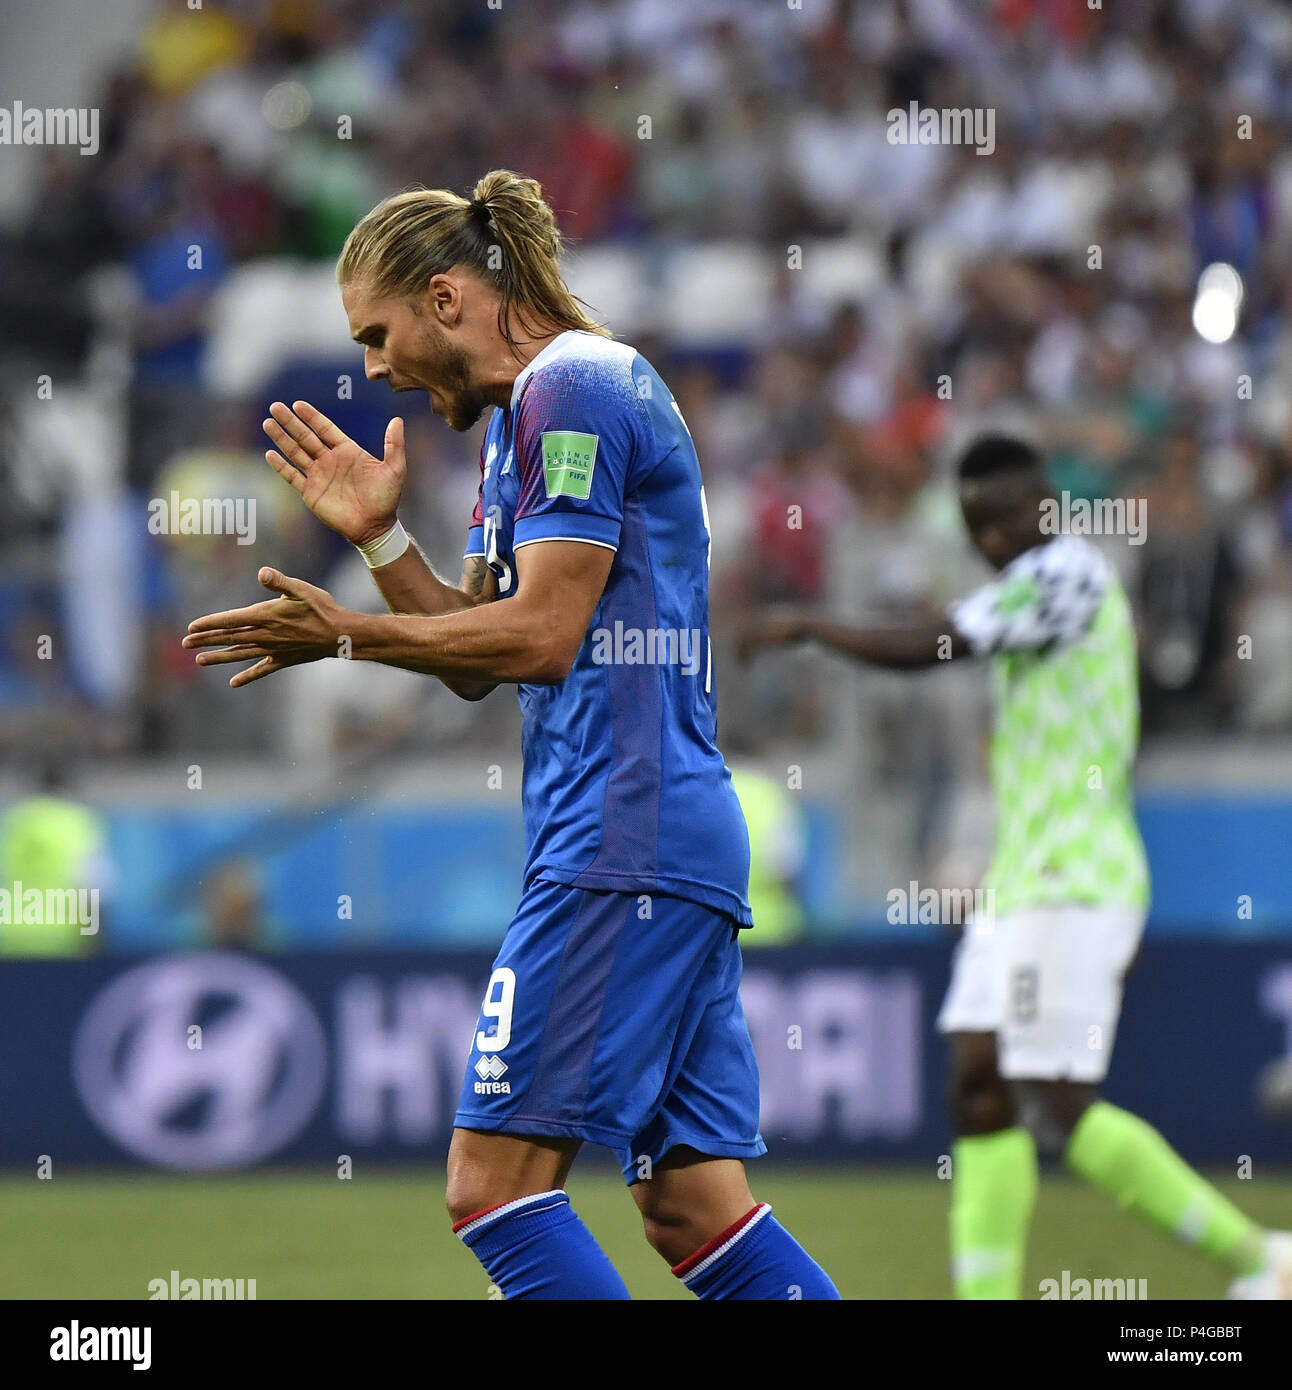 Volgograd, Russia. 22nd June, 2018. Rurik Gislason of Iceland reacts during the 2018 FIFA World Cup Group D match between Nigeria and Iceland in Volgograd, Russia, June 22, 2018. Nigeria won 2-0. Credit: He Canling/Xinhua/Alamy Live News Stock Photo